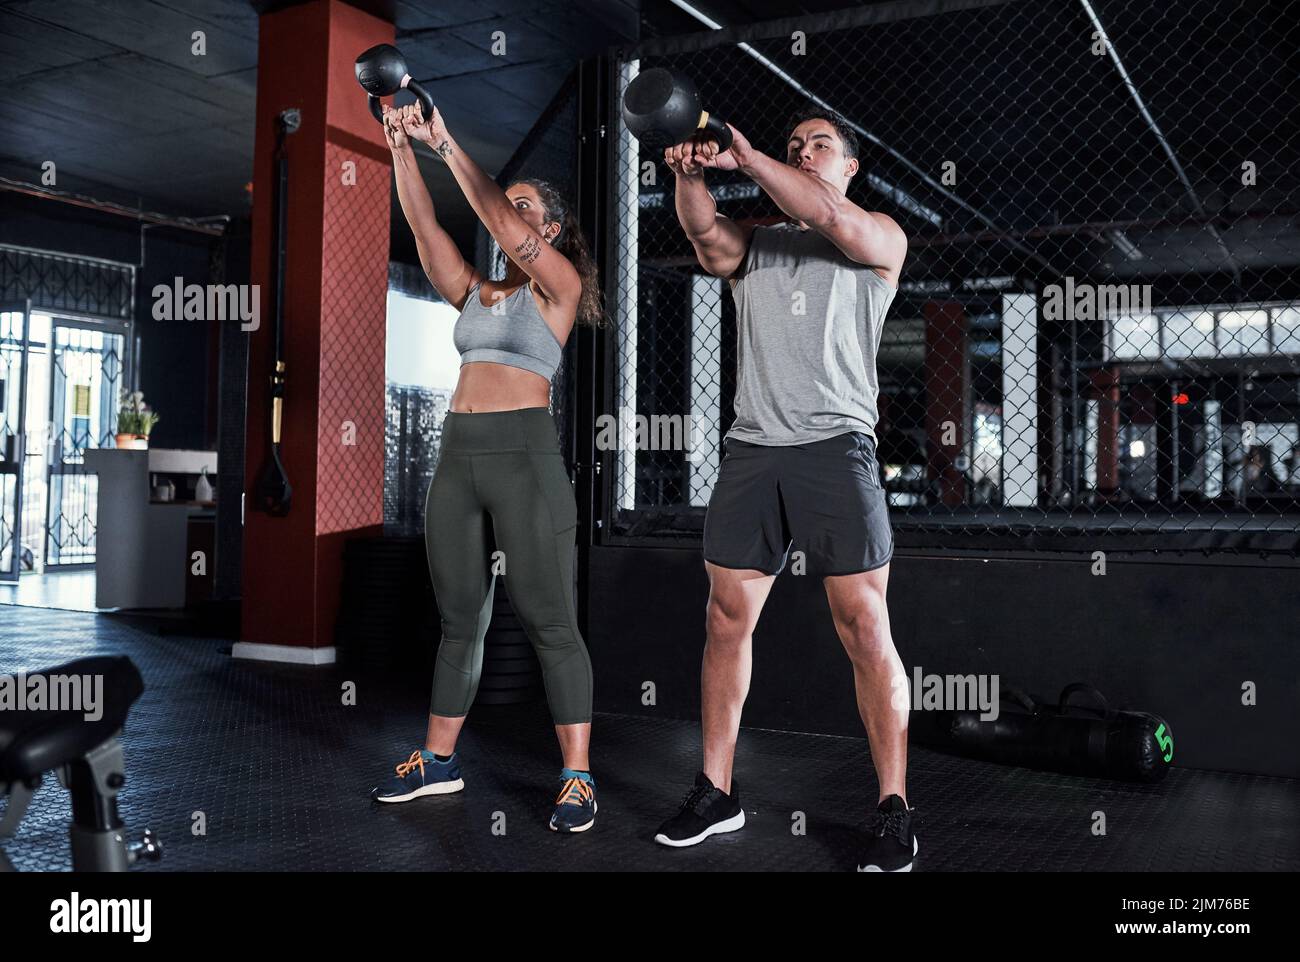 Upping their power and endurance together. two sporty young people exercising with kettlebells in a gym. Stock Photo